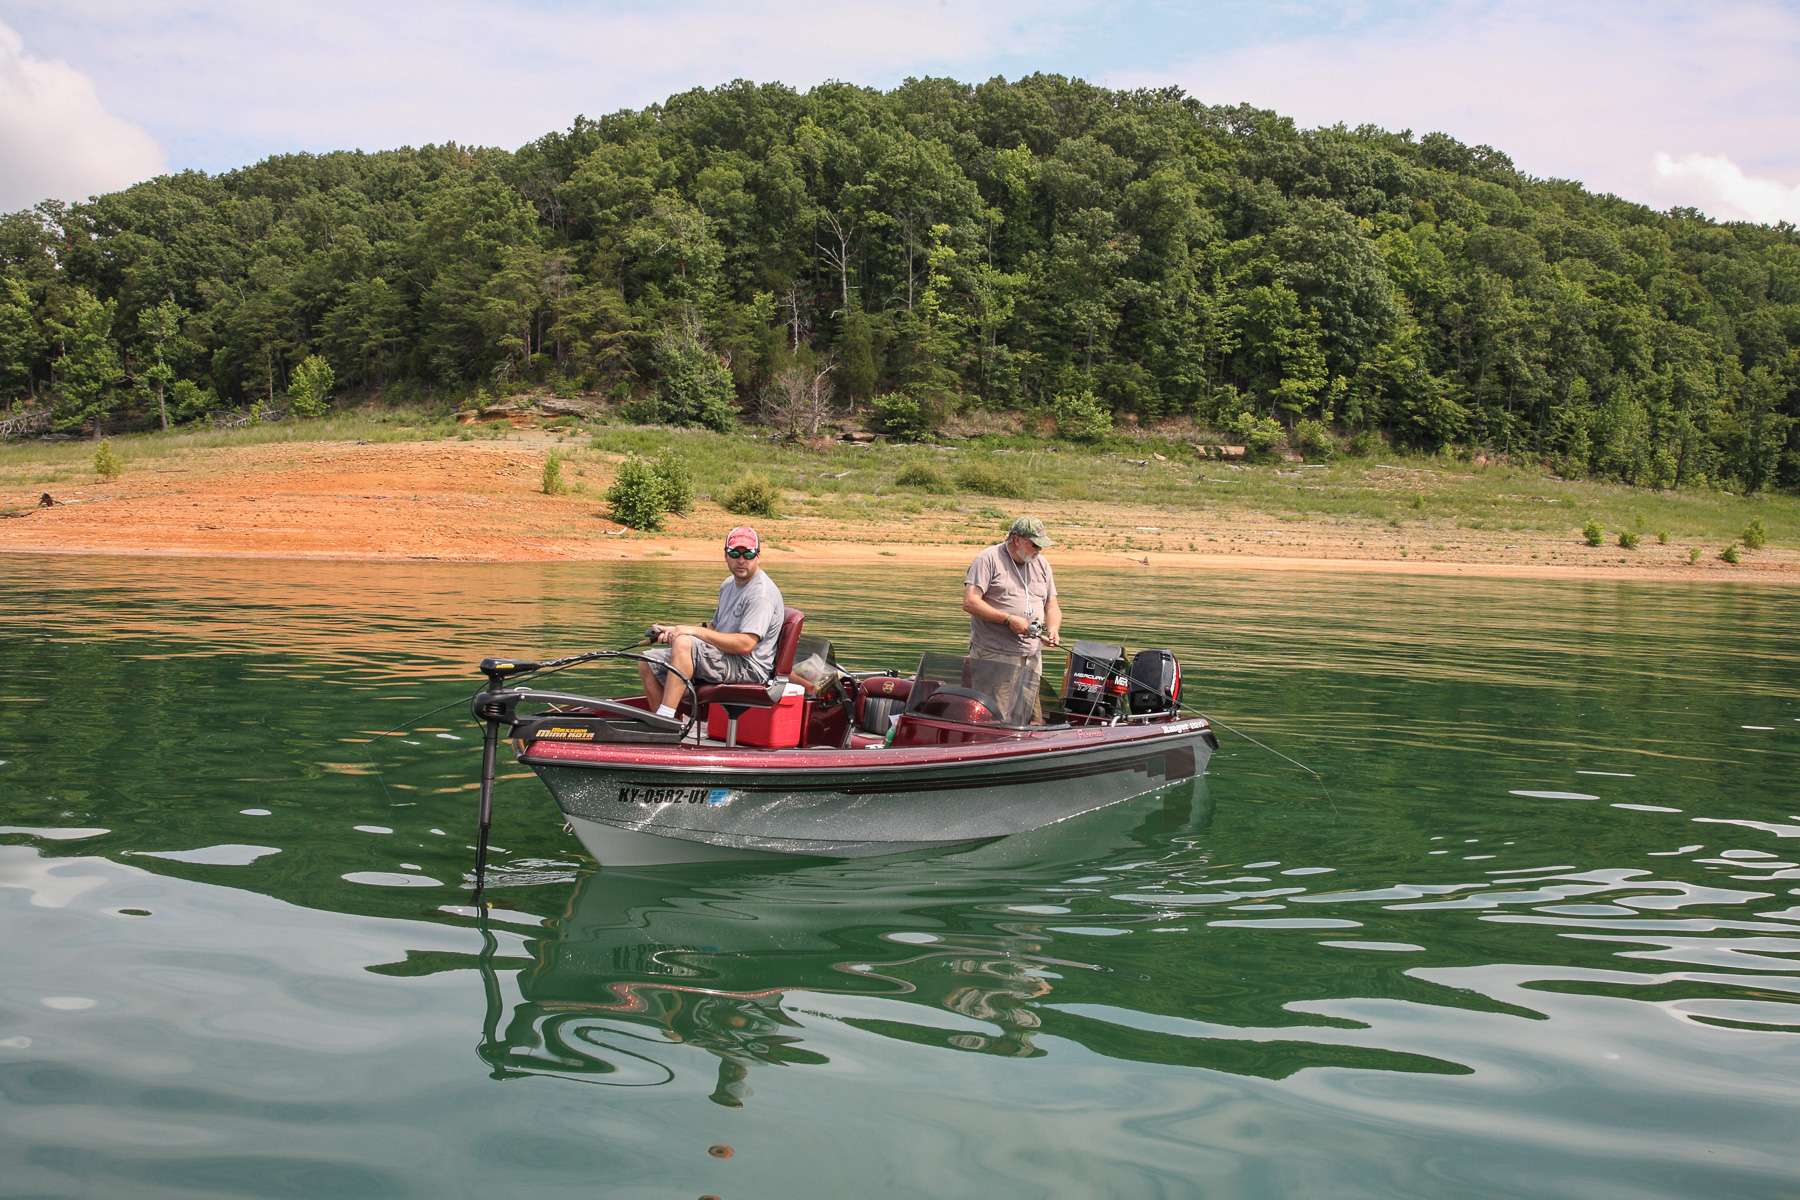 <h4>22. Lake Cumberland, Kentucky</h4>
  [65,530 acres] At Cumberland, you stand a good chance of catching largemouth, smallmouth and spotted bass on the same day. The fishing has improved since the dam was repaired and the lake returned to full pool. It took 60 pounds to win a four-day major tournament here in April 2017. Tournament data collected on Lake Cumberland by the Kentucky Department of Fish and Wildlife shows that in 2016, the average weight to win an eight-hour tournament was 13.02 and the average big fish weighed 4.52.
